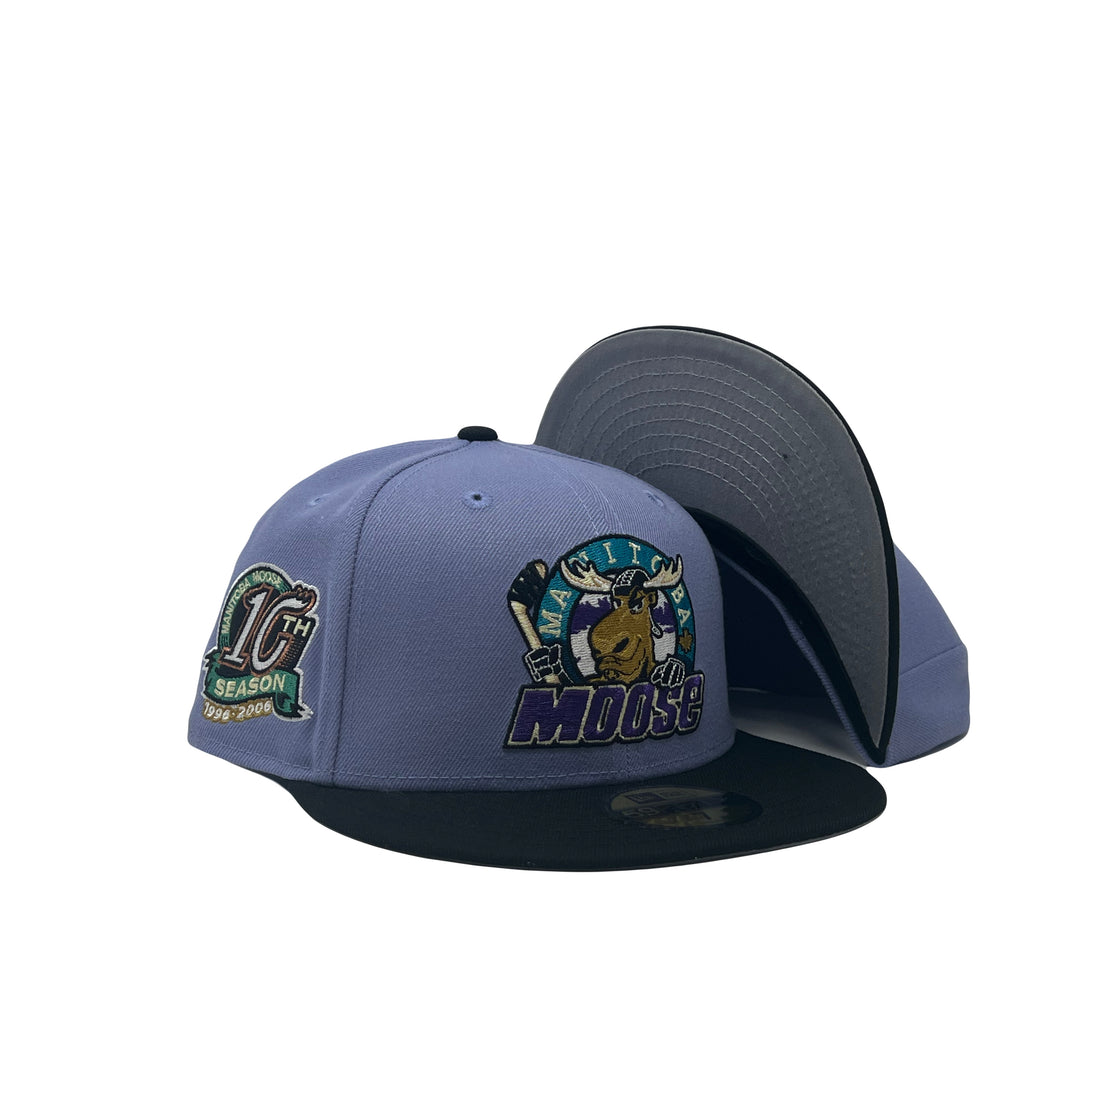 Manitoba Moose 10th Anniversary American Hockey League 5950 New Era Fitted Hat